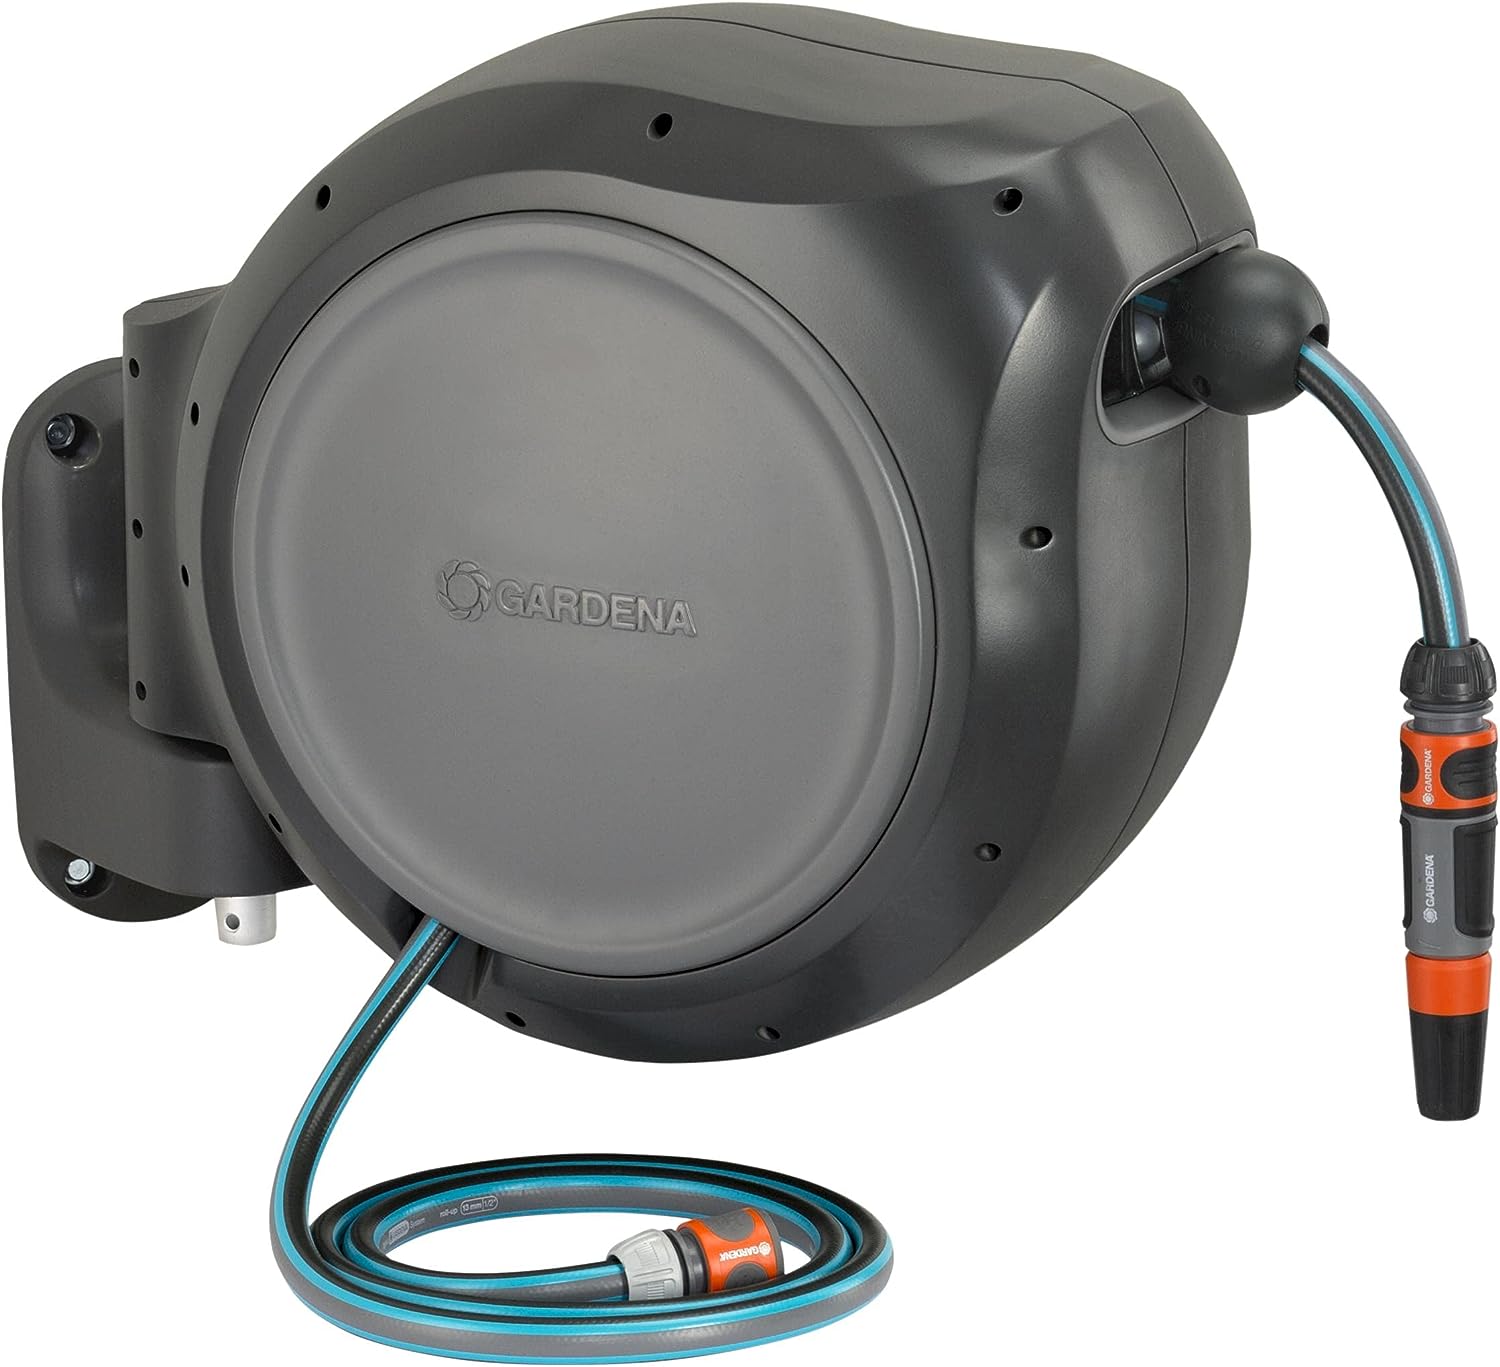 GARDENA 8040 50 Foot Wall Mounted Retractable Reel with Hose Guide